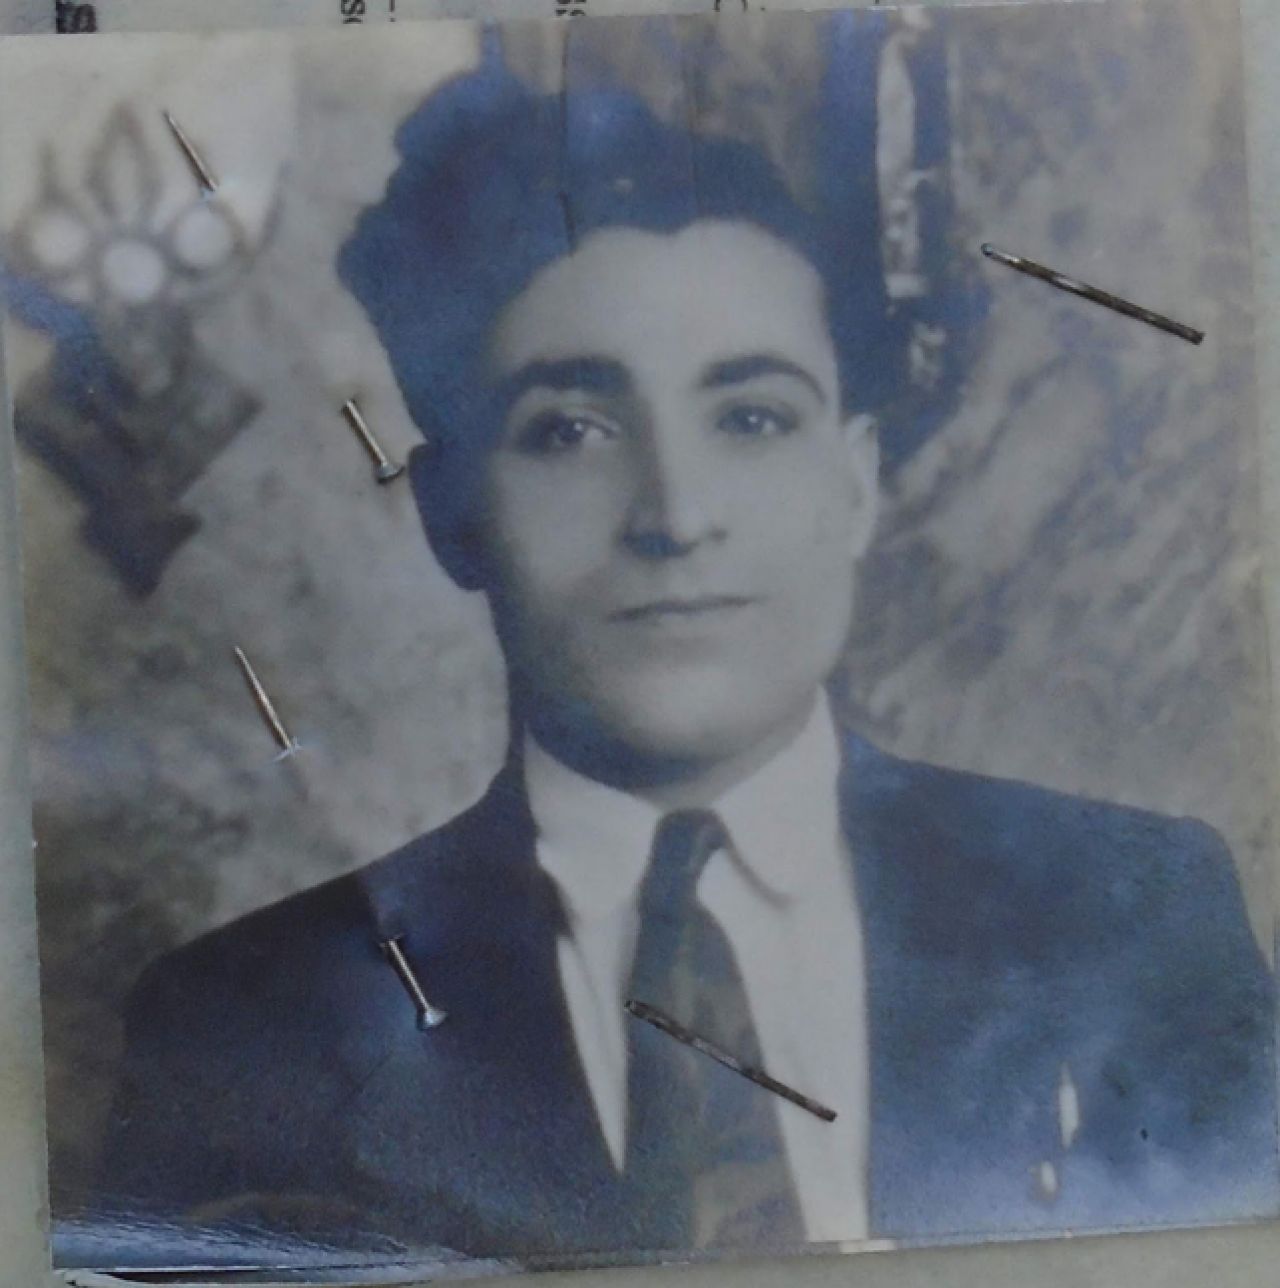 Photograph of Hassan, a young man from Lebanon.